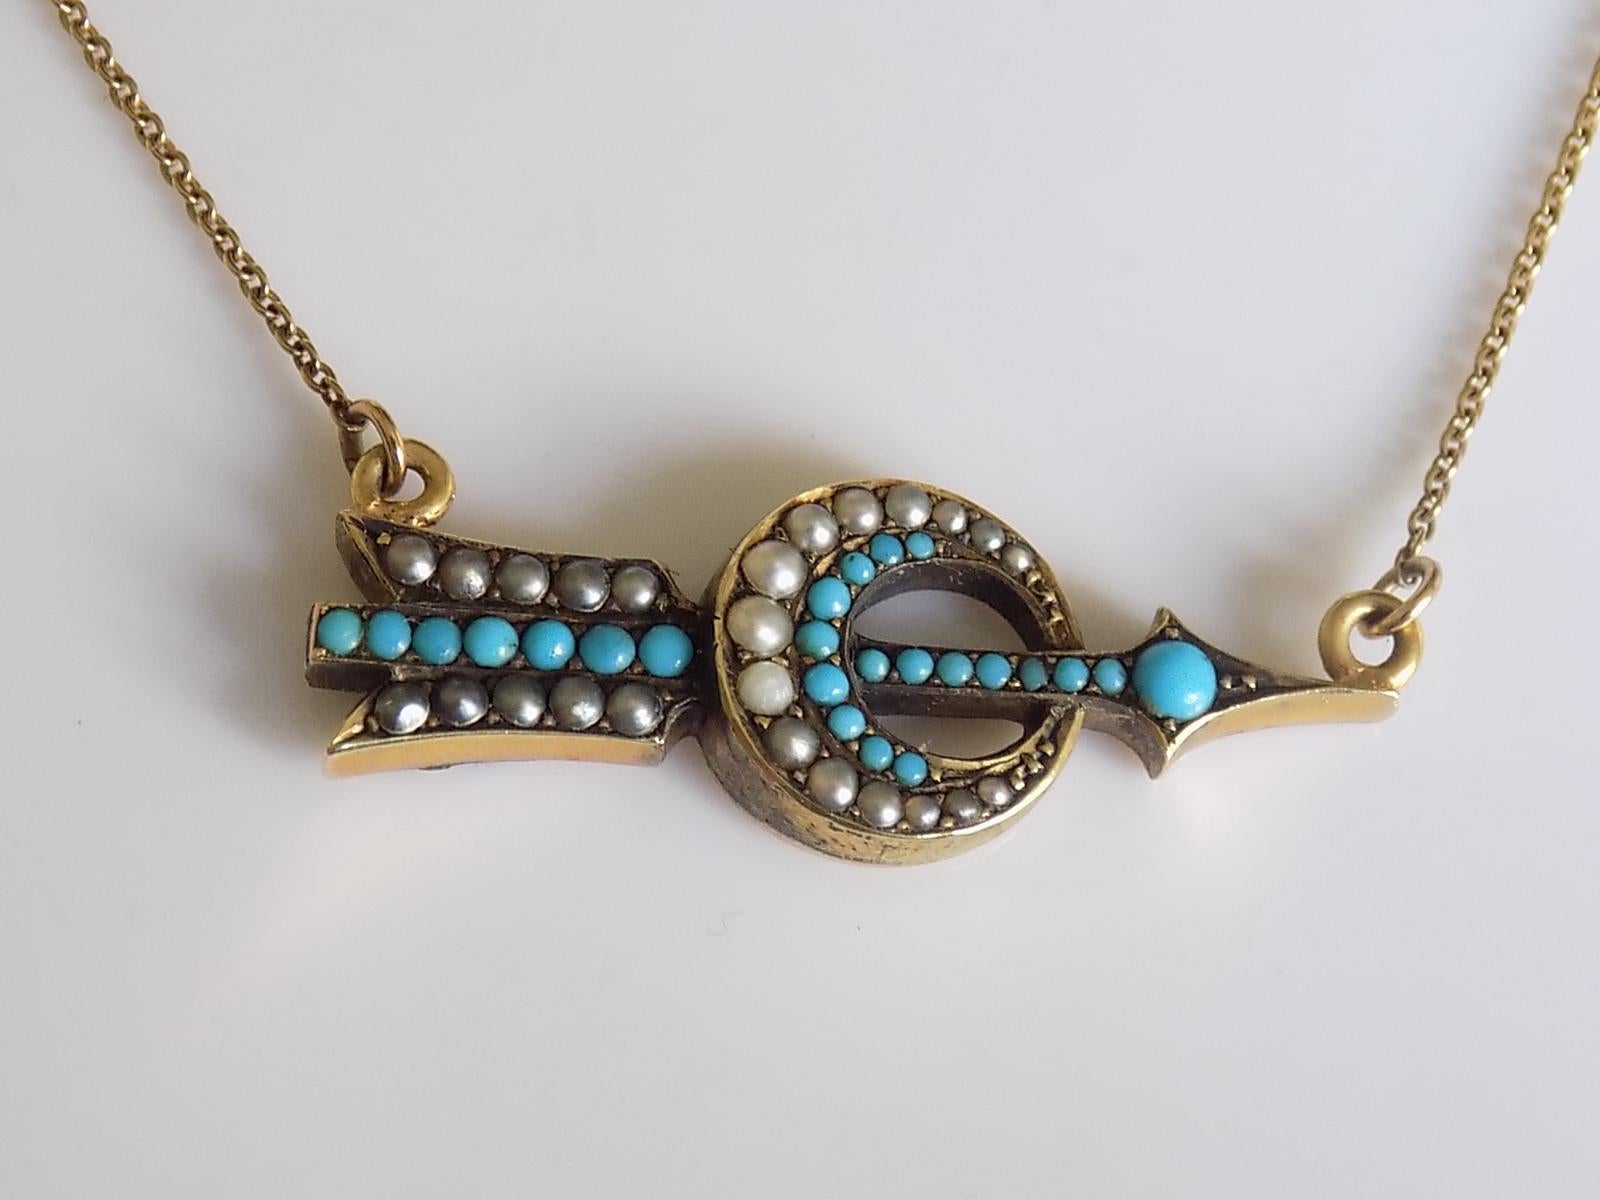 This is a Victorian 18 Carat Yellow Gold, Turquoise and split seed Pearl brooch converted to the necklace. The necklace made in shape of Arrow and Crescent ( Target ) on 9 Carat Gold chain. A rare and eye catching necklace.
Pendant 35mm x